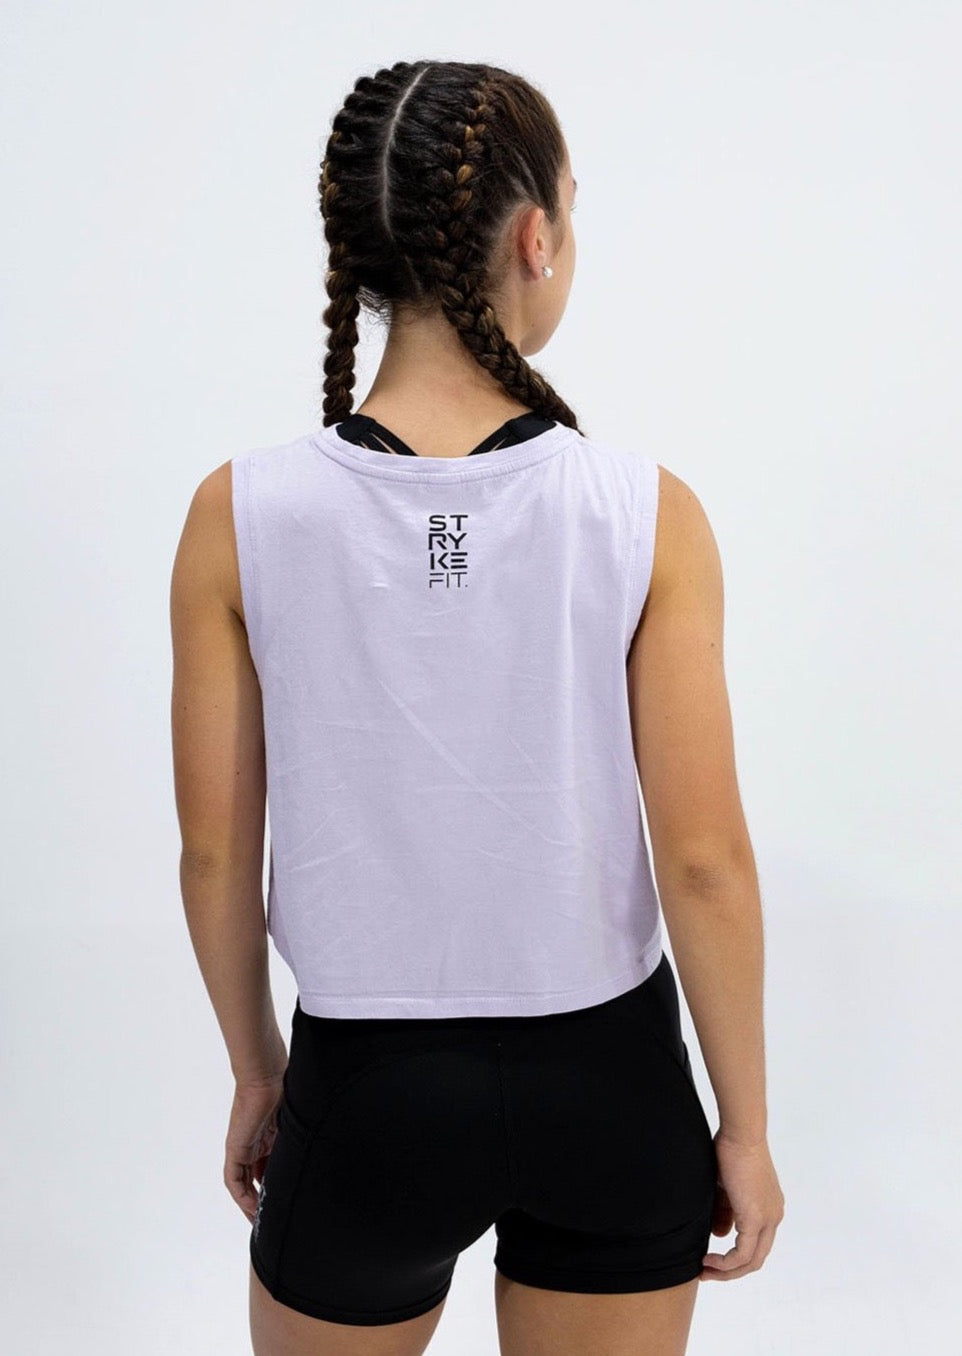 SQUAD SLEEVELESS TANK is a popular style made from a soft combed cotton jersey and featuring a crop tank style, this garment will become your next fav. The SQUAD SLEEVELESS TANK is offered in Peacock Green, White, Lilac and Tangerine.